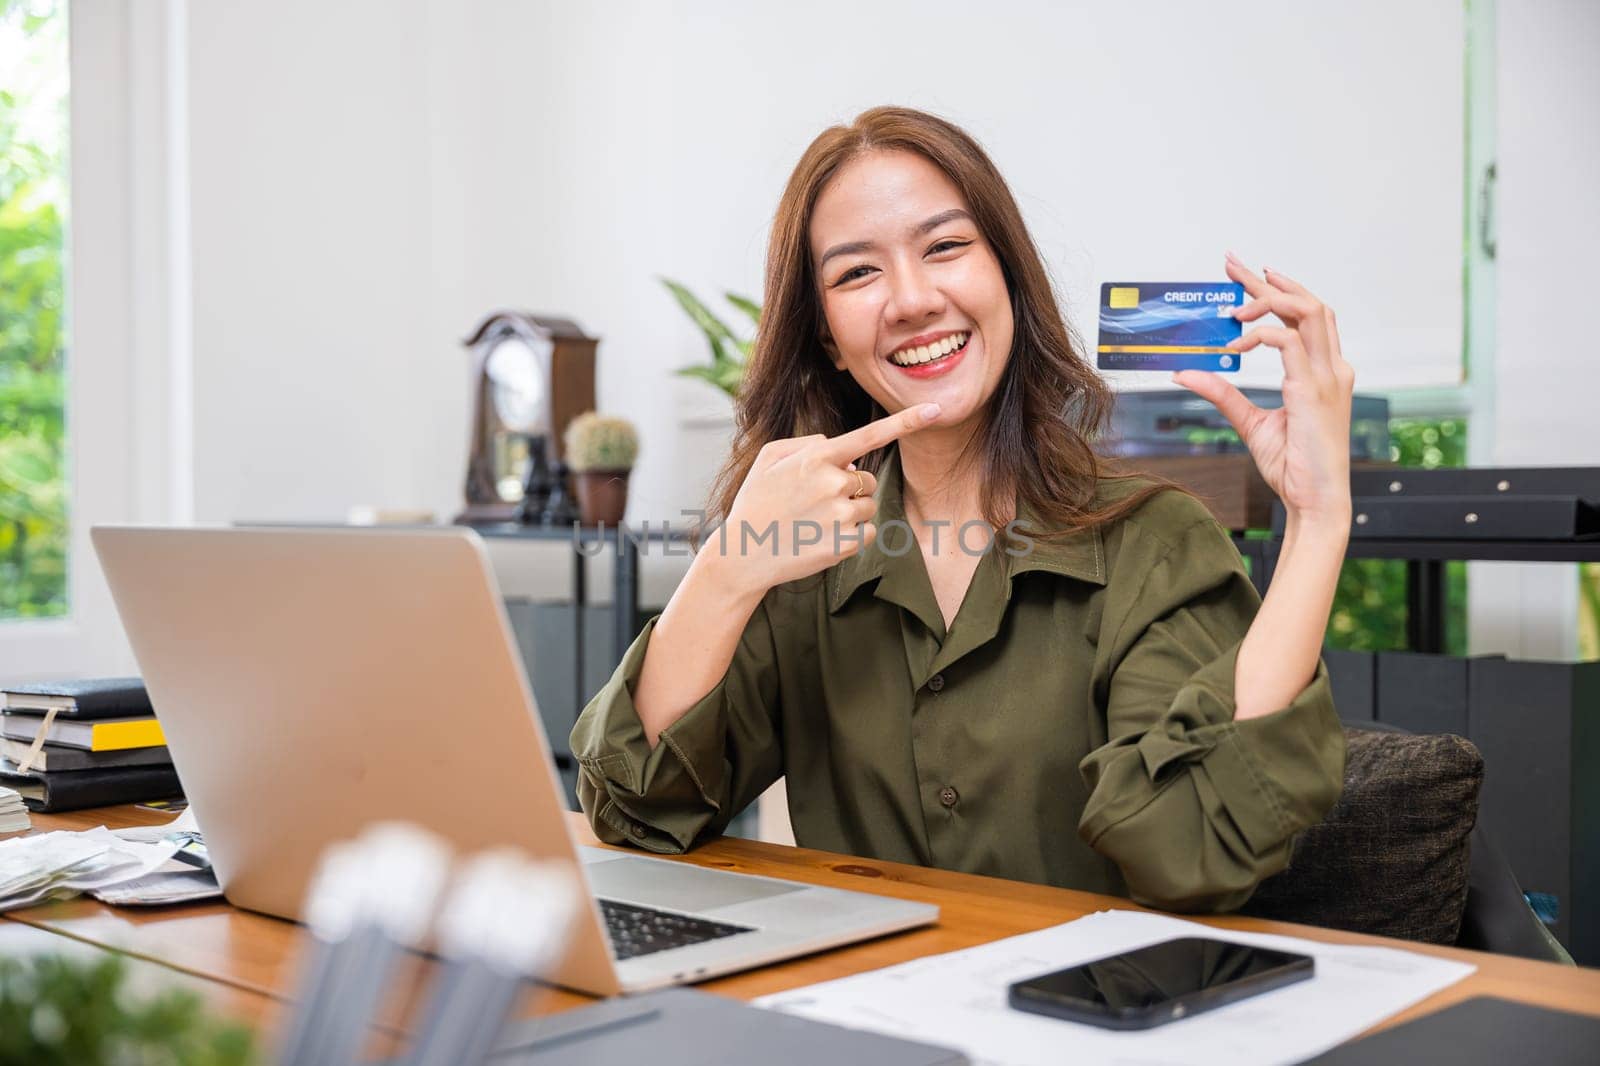 woman excited holding credit card and pointing the card with laptop computer by Sorapop